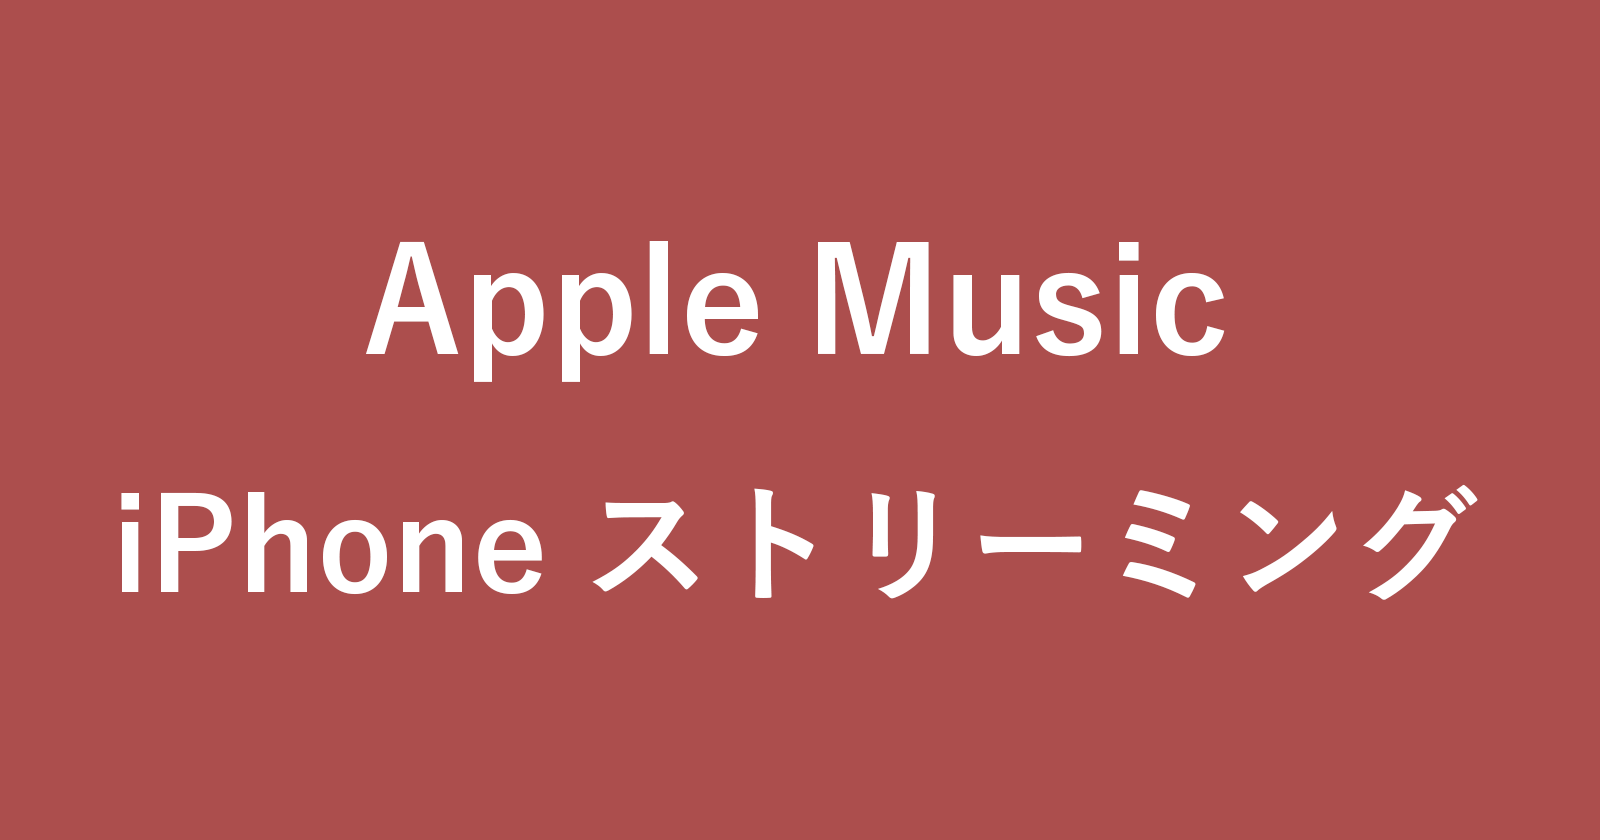 apple music iphone streaming